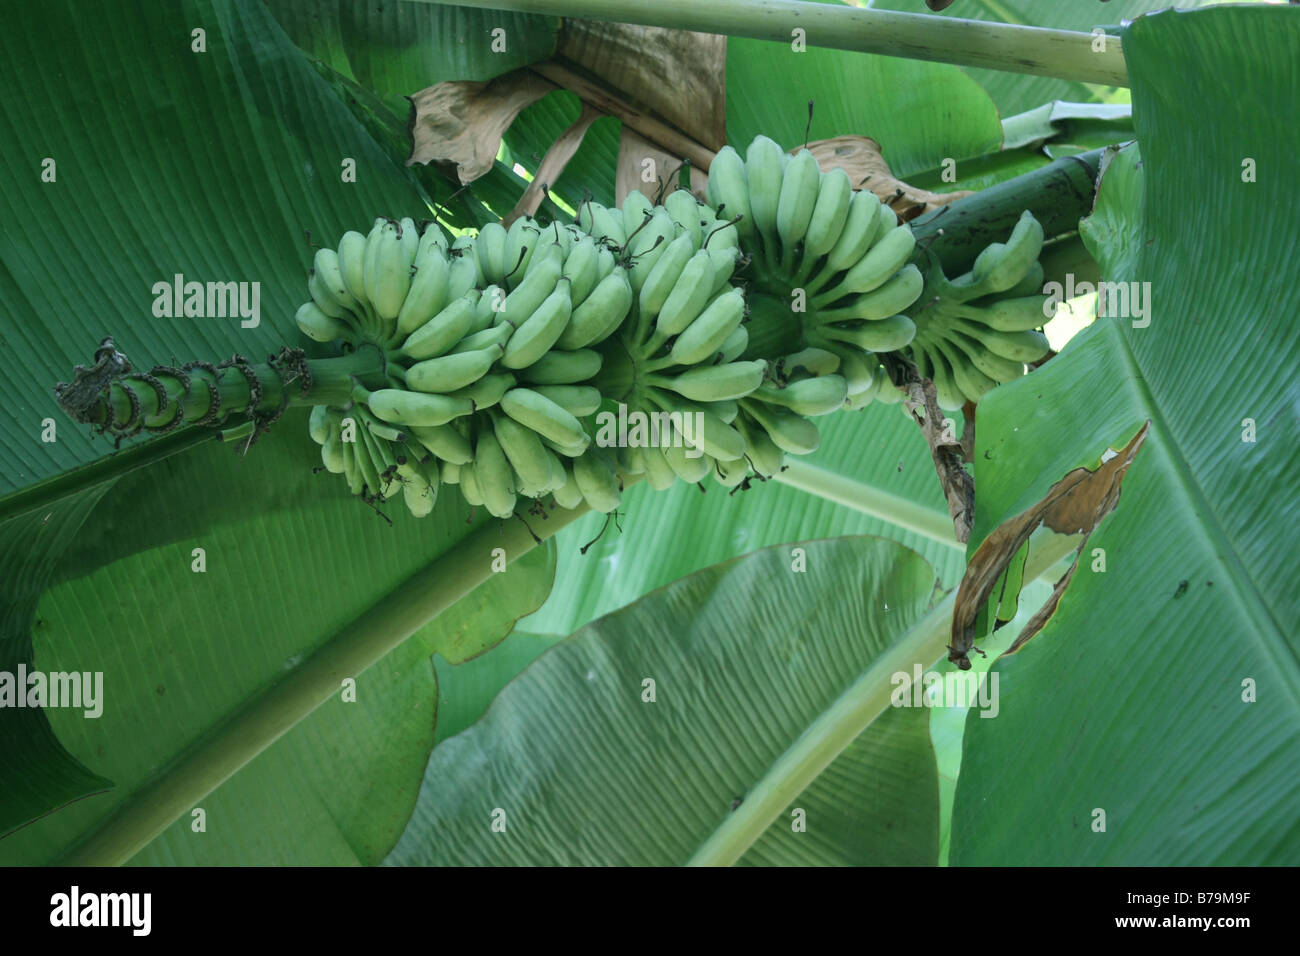 A Banana Fruit hanging from a plantain Stock Photo